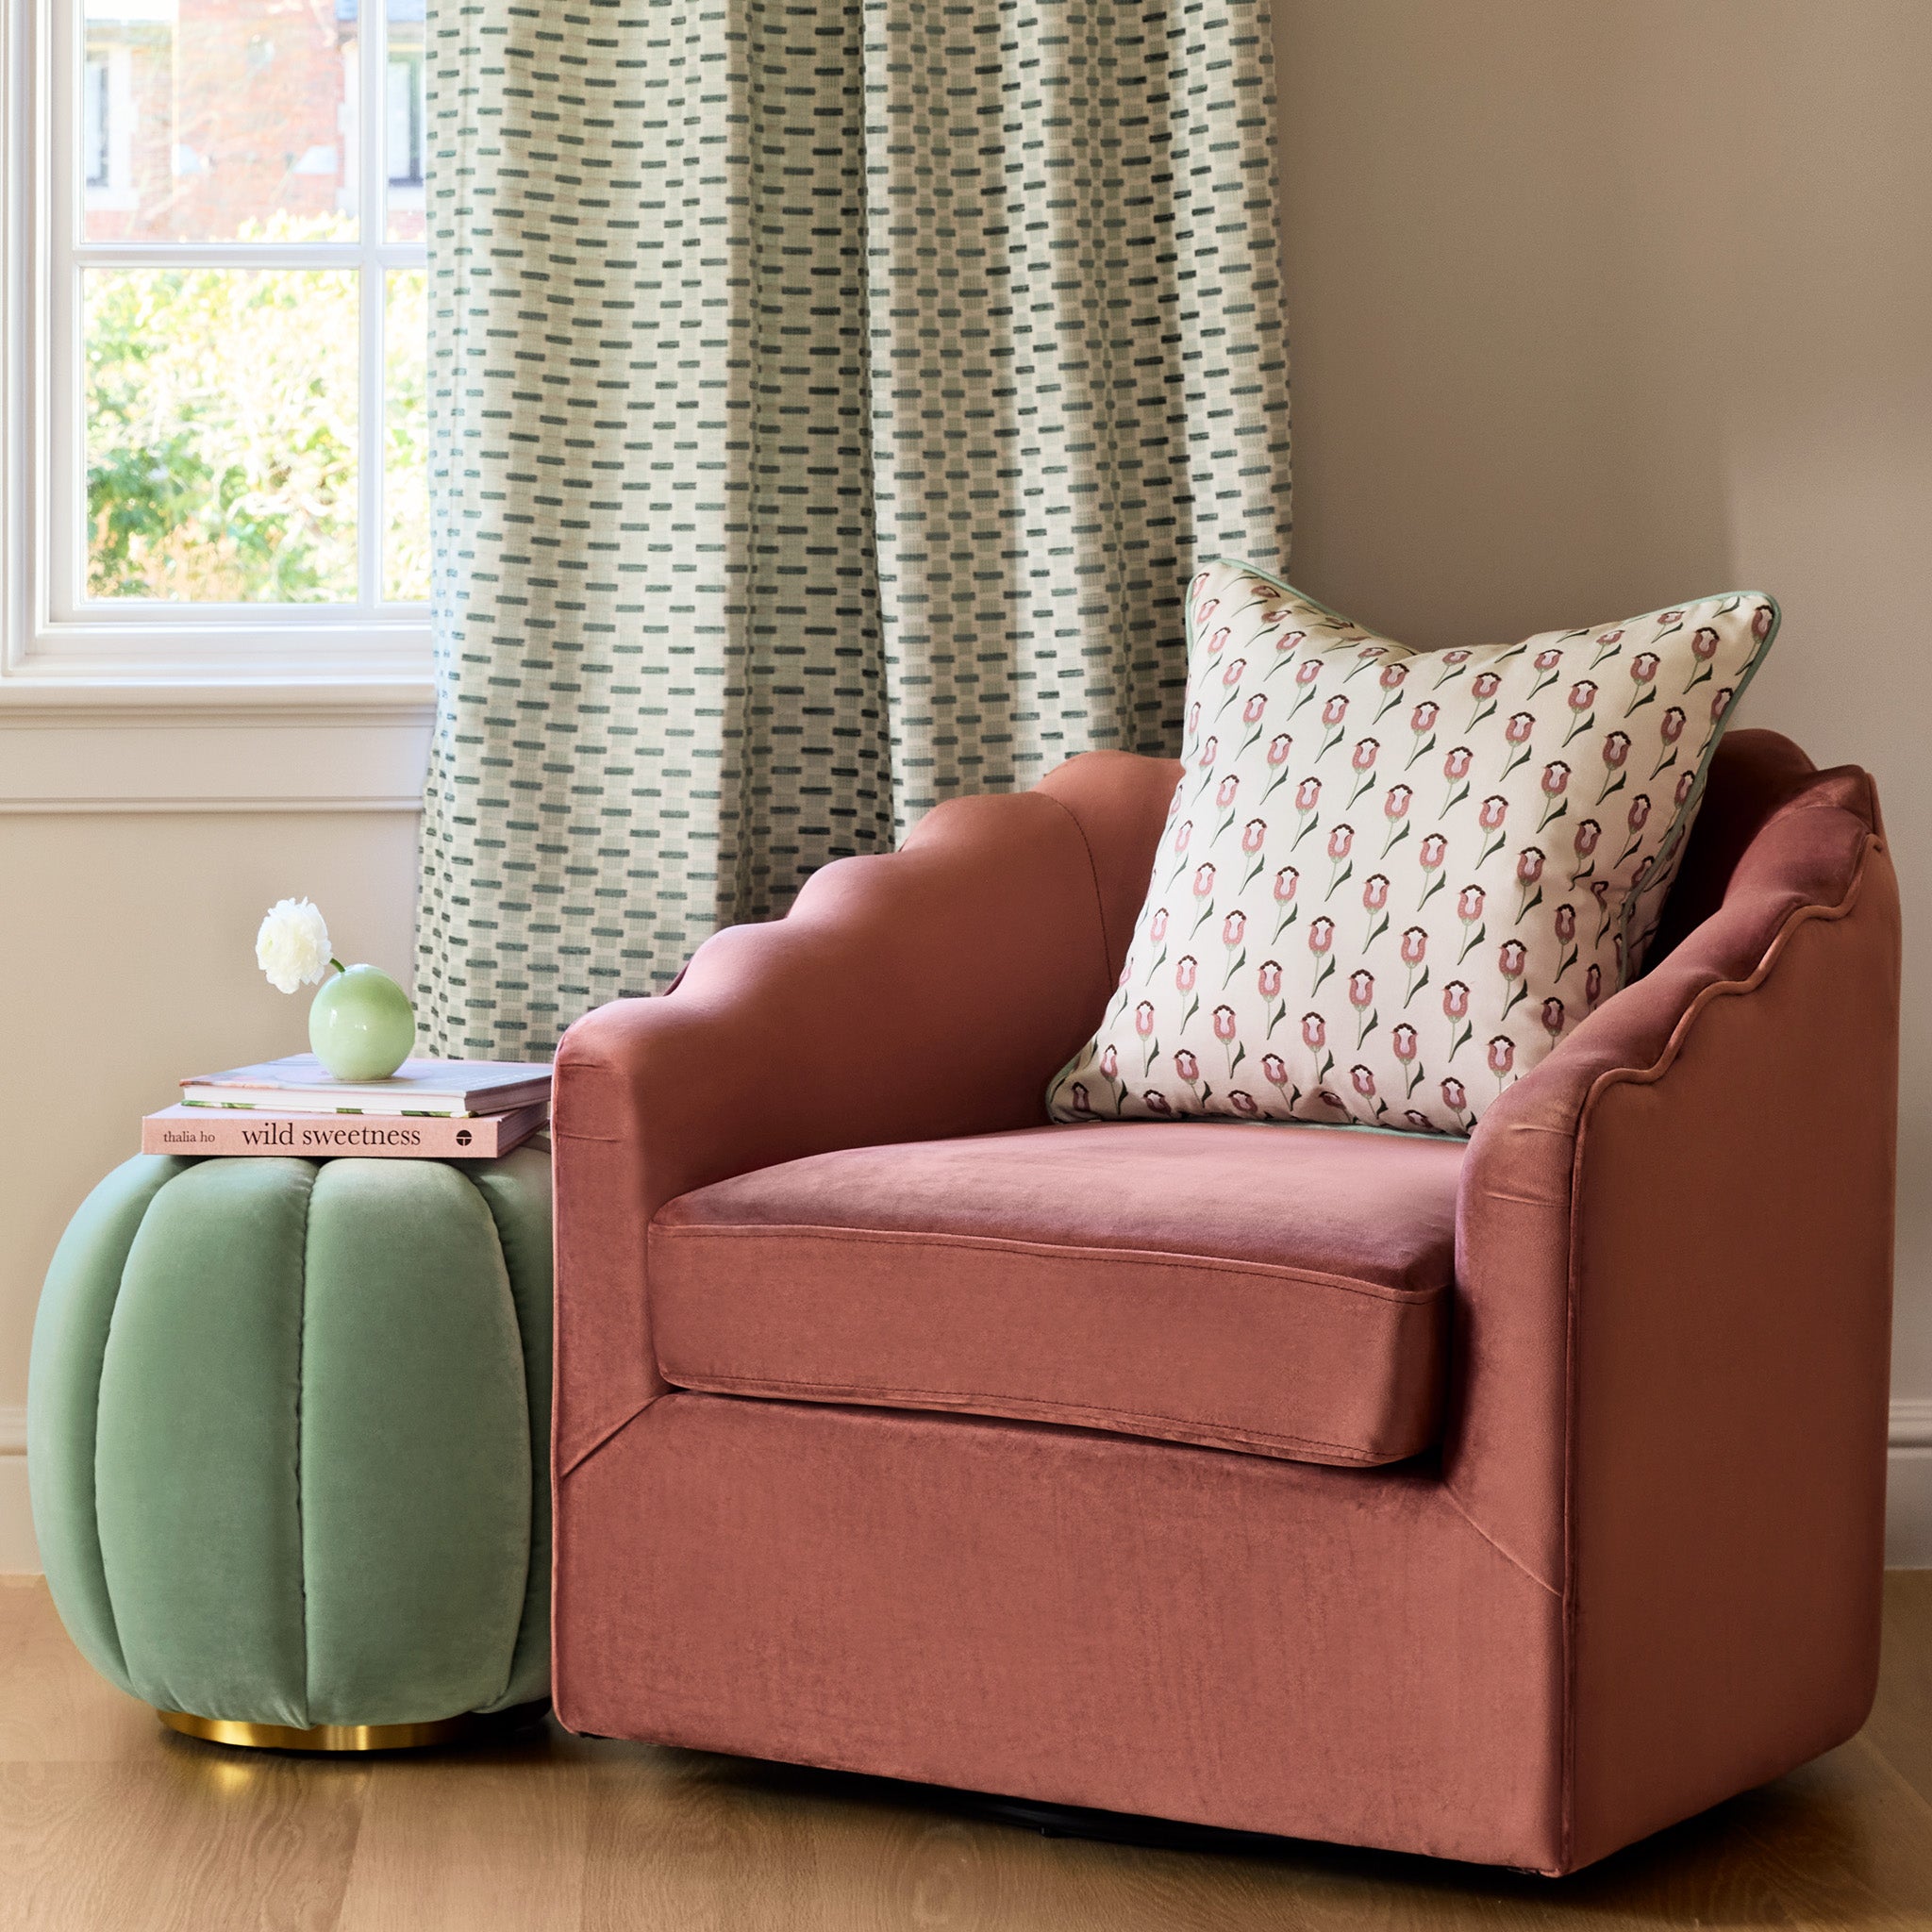 chenille and woven jacquard mint green geometric curtains on a metal rod in front of an illuminated window with a coral pink chair with a pink and green floral printed pillow on it with a mint green ottoman with books stacked on it